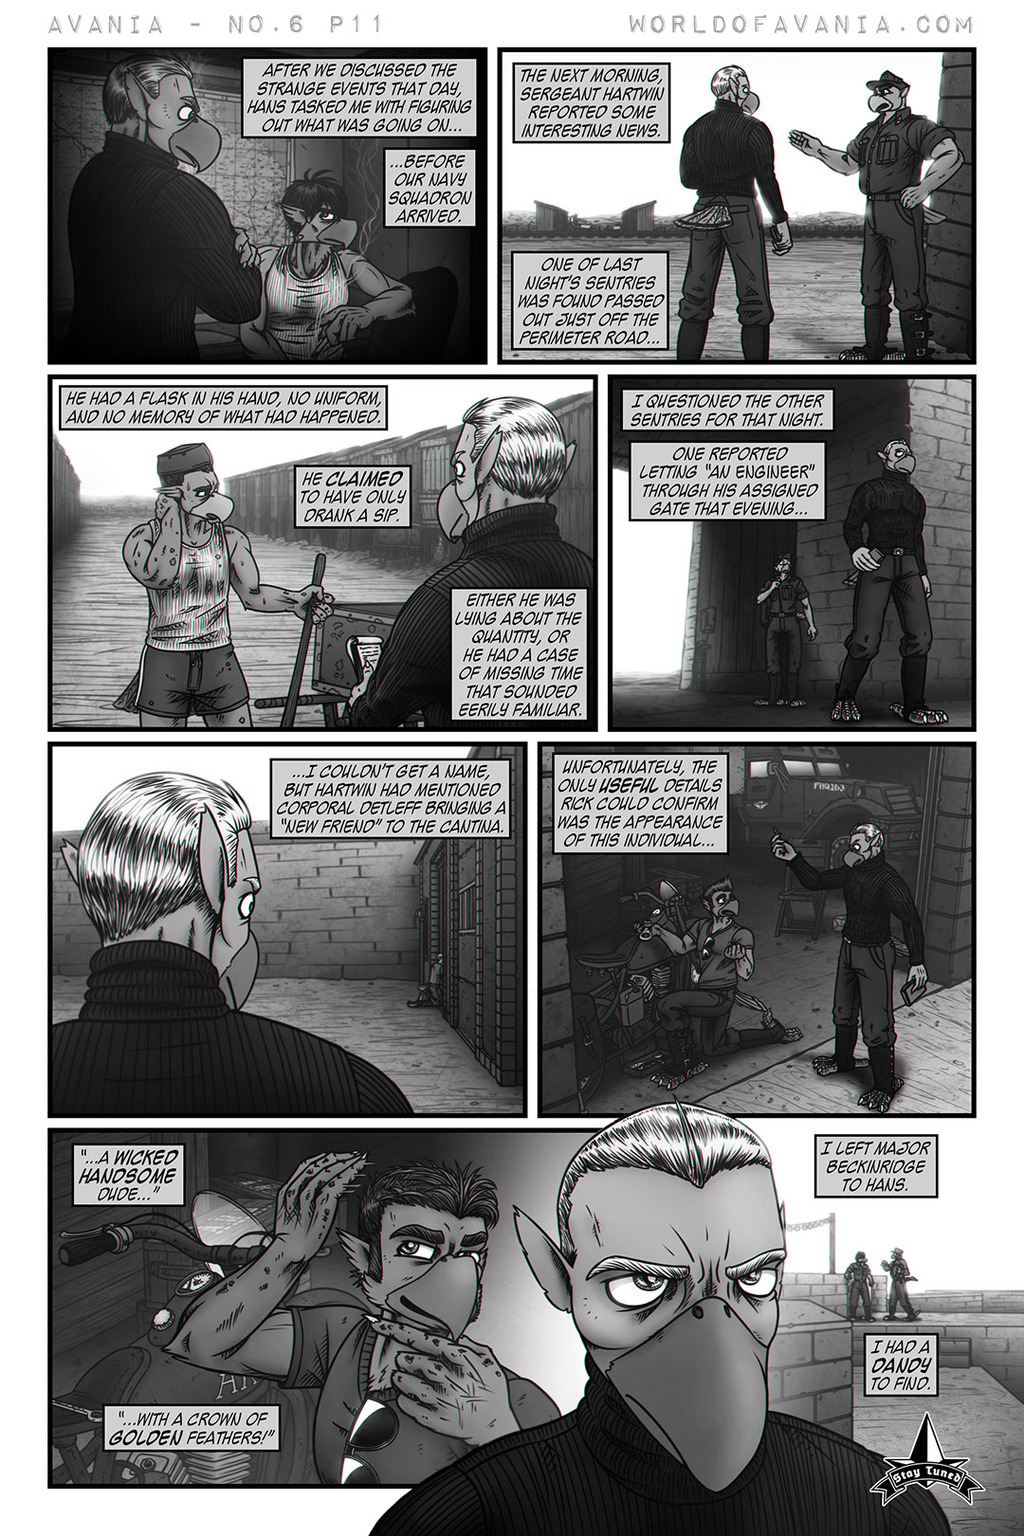 Avania Comic - Issue No.6, Page 11